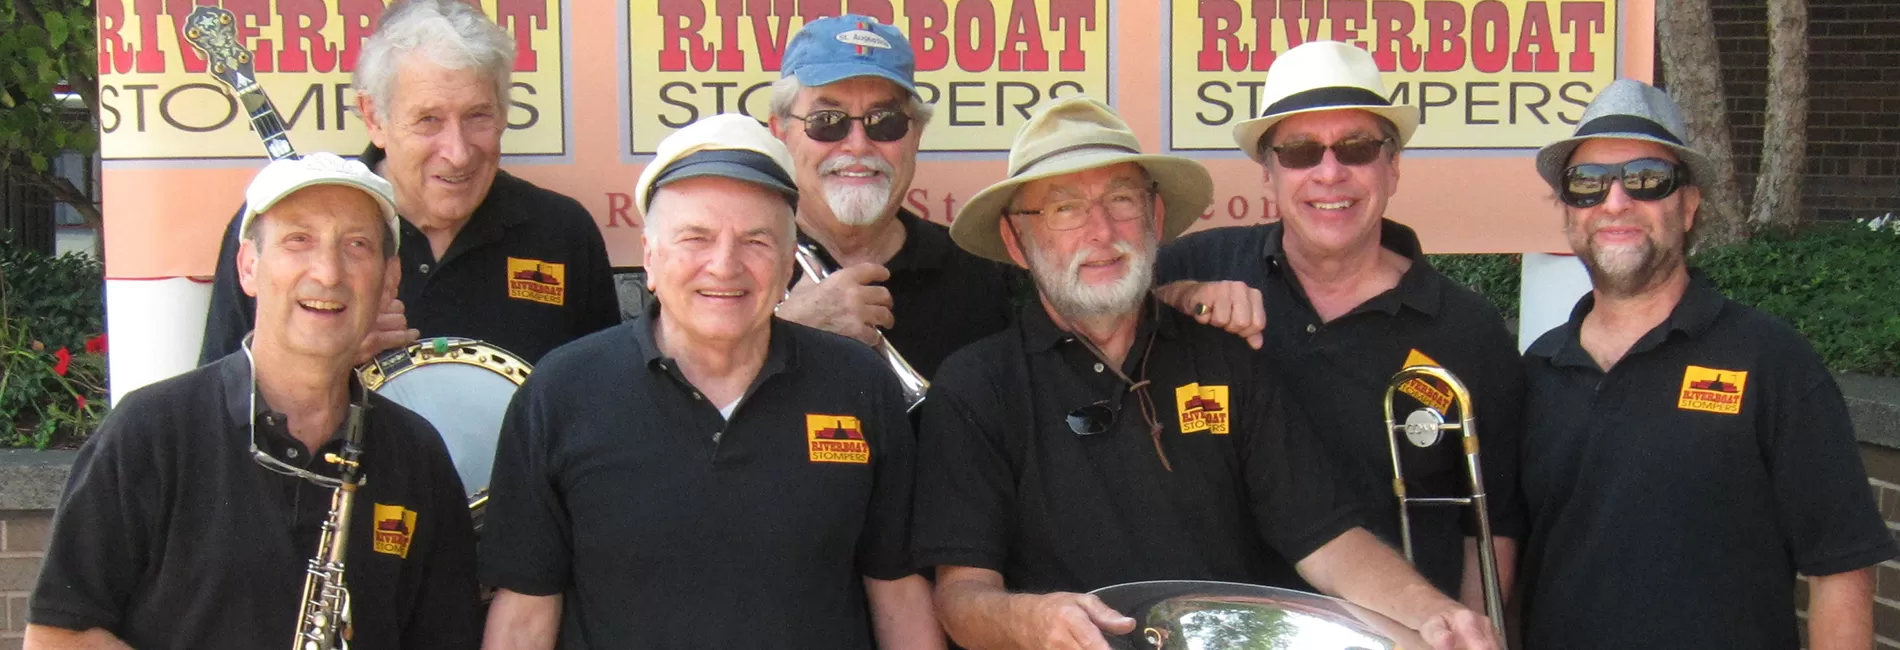 RIVERBOAT STOMPERS JAZZ BAND